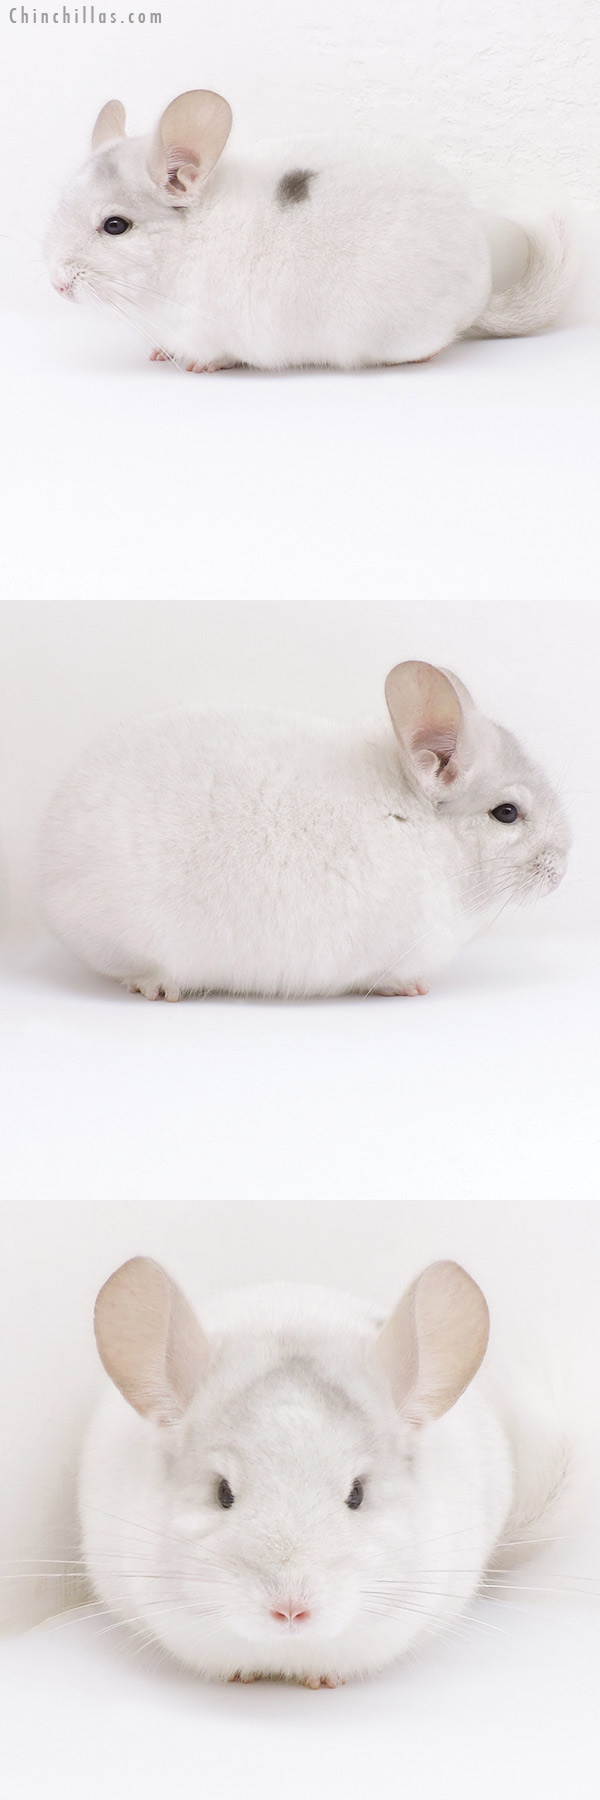 Chinchilla or related item offered for sale or export on Chinchillas.com - 19033 Show Quality Pink White Male Chinchilla with Body Spot